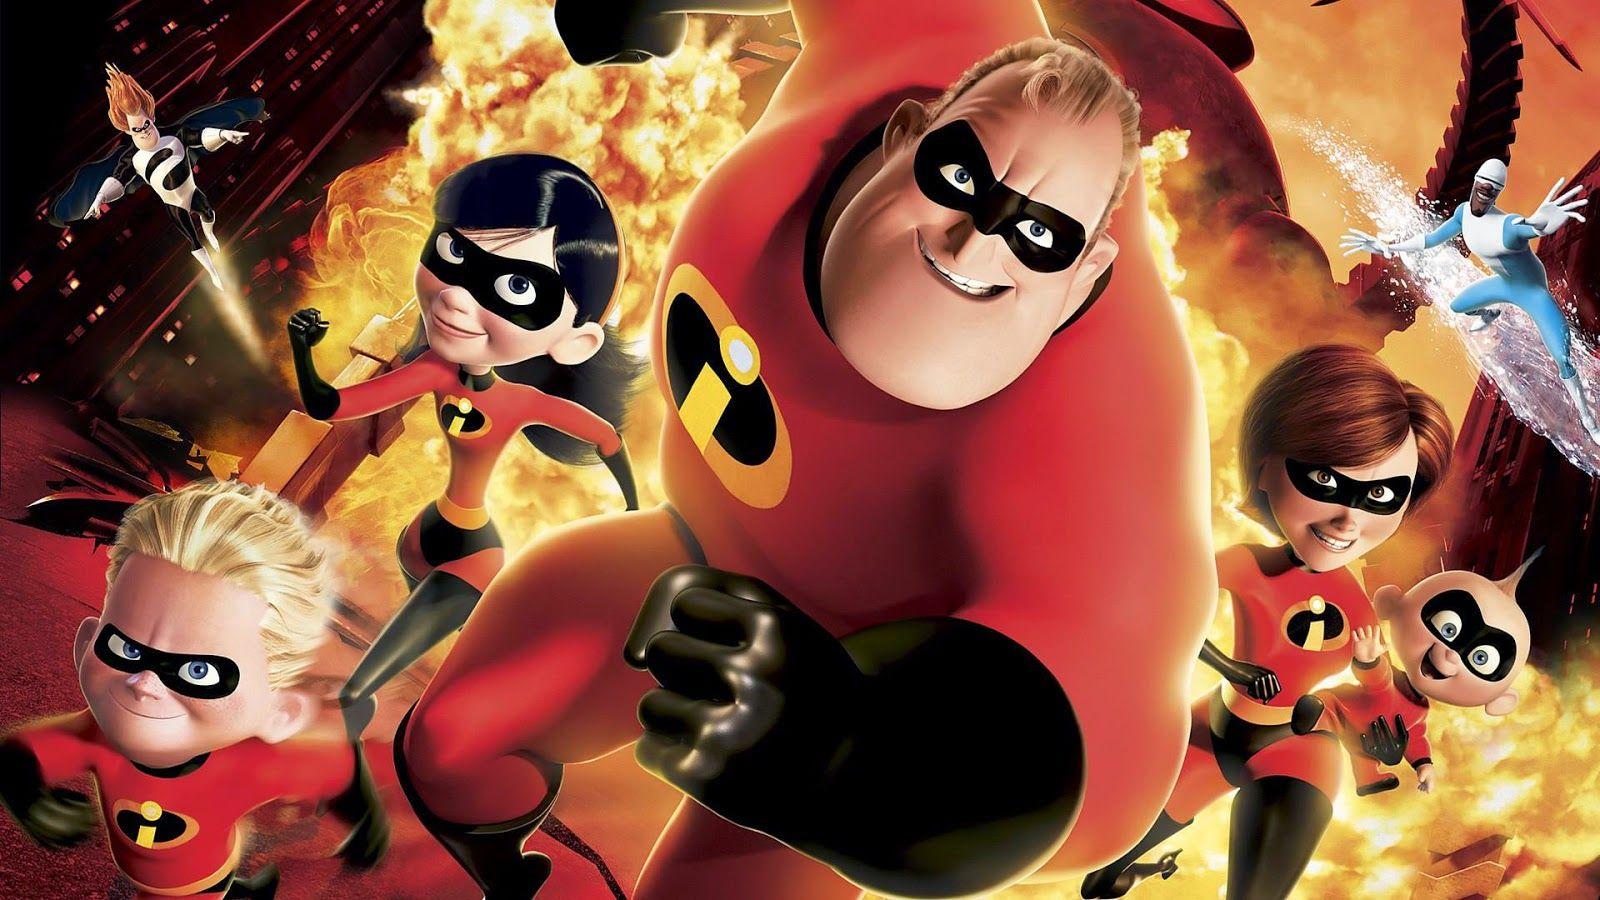 Pixar and Beyond: Disney confirms 'The Incredibles 2' and 'Cars 3'